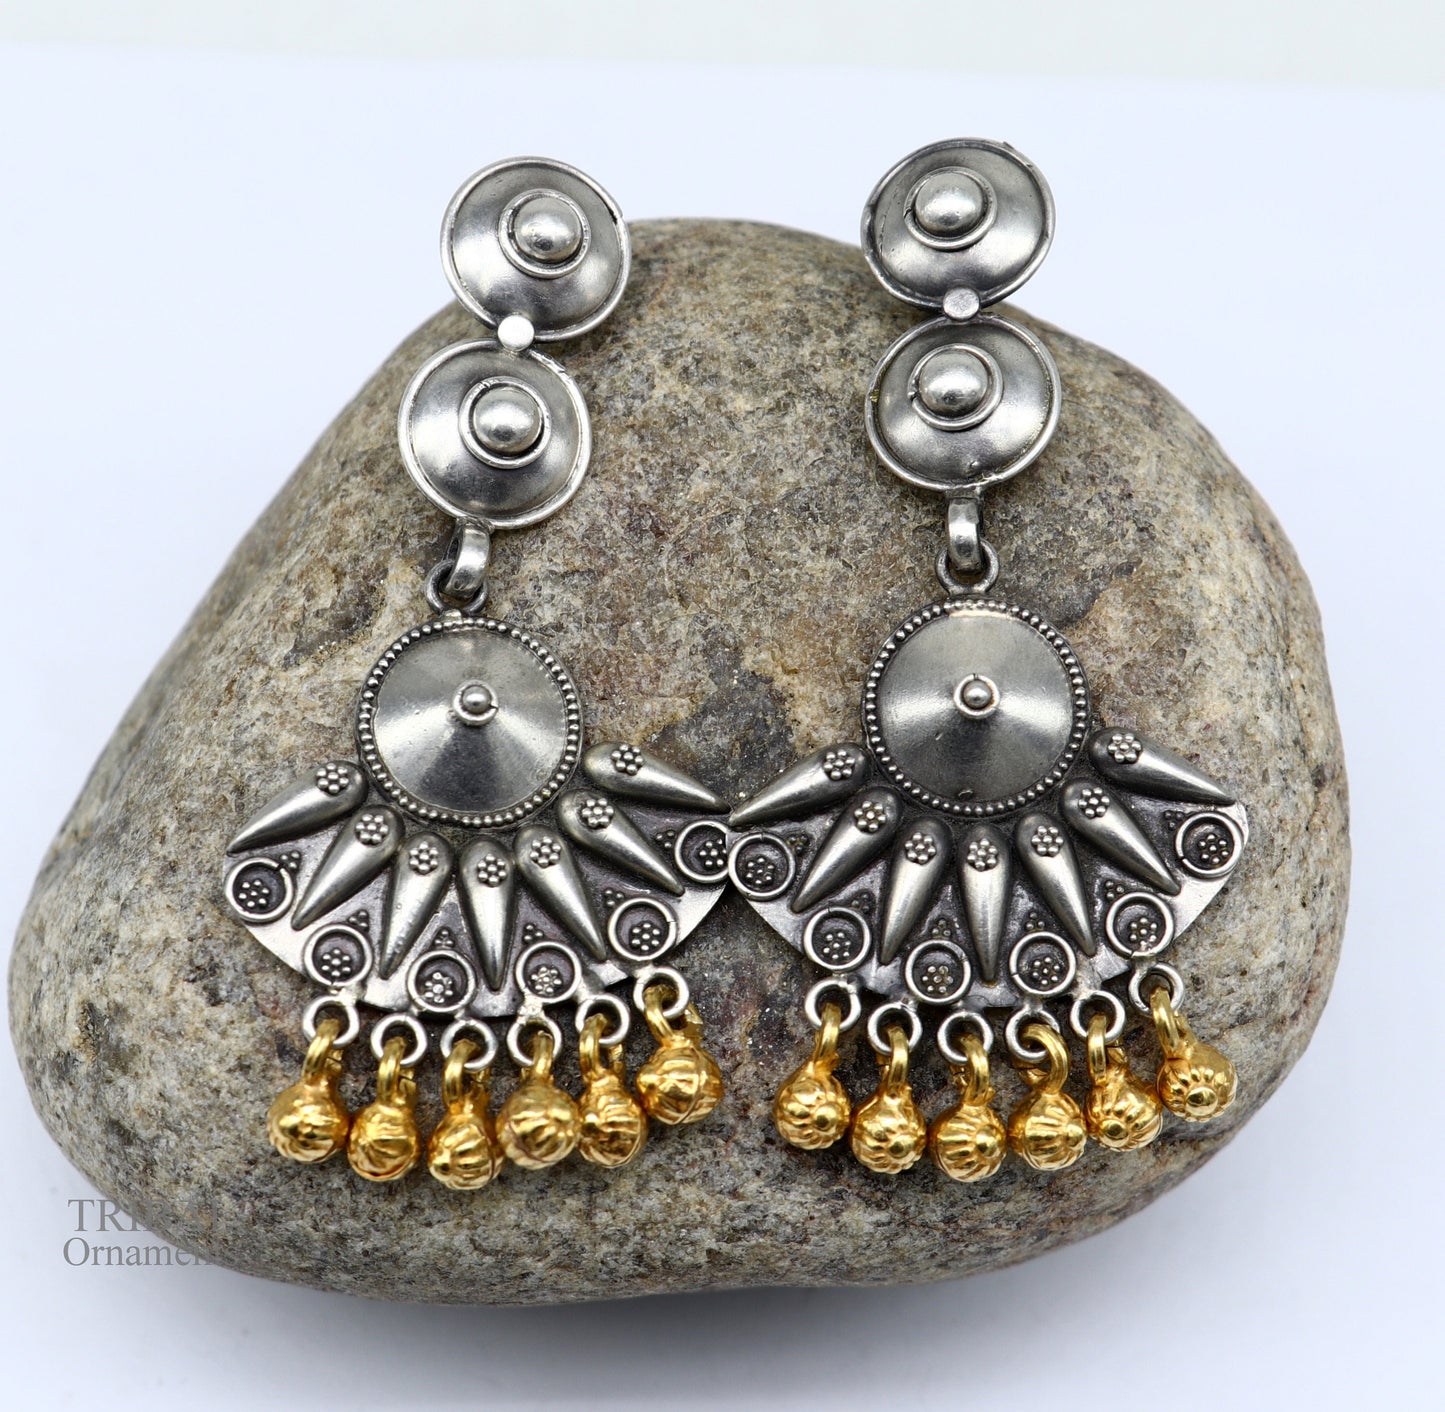 925 sterling silver vintage design traditional stud drop dangle earring with hanging gold polished jingling bells s gifting earrings ear1140 - TRIBAL ORNAMENTS